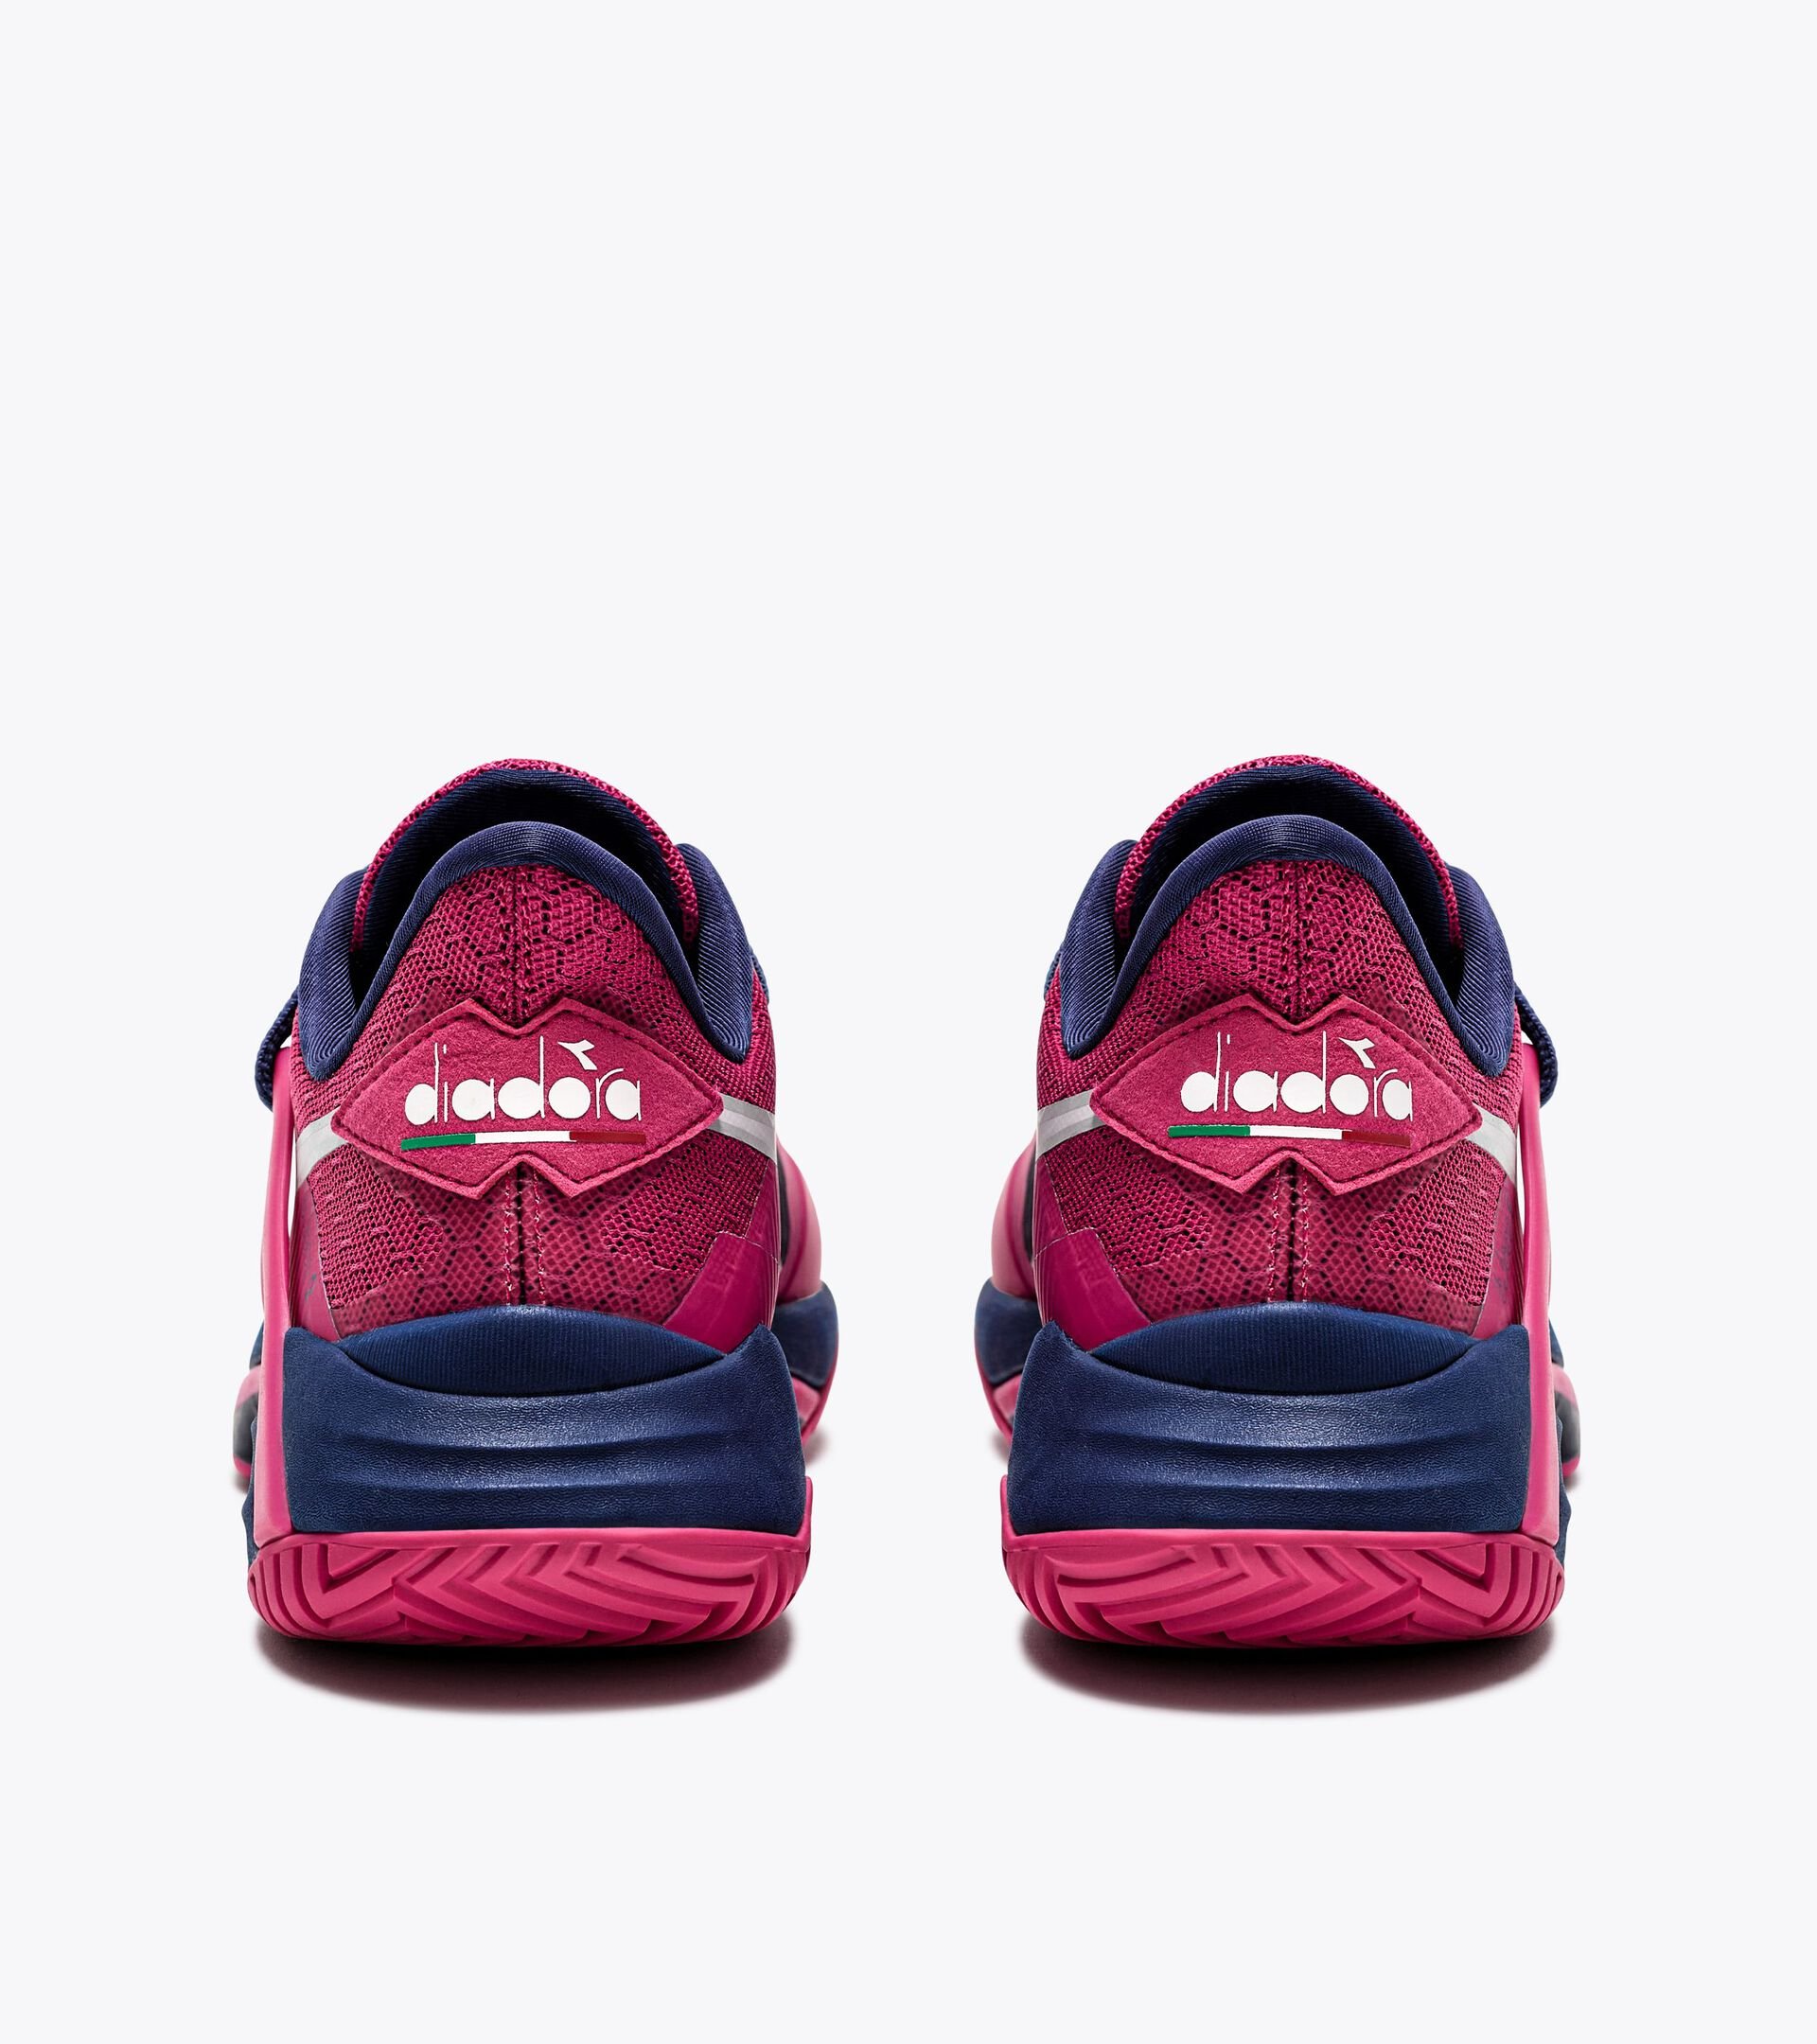 Tennis shoes for hard surfaces or clay courts - Women B.ICON 2 W AG PINK YARROW/WHITE/BLUEPRINT - Diadora